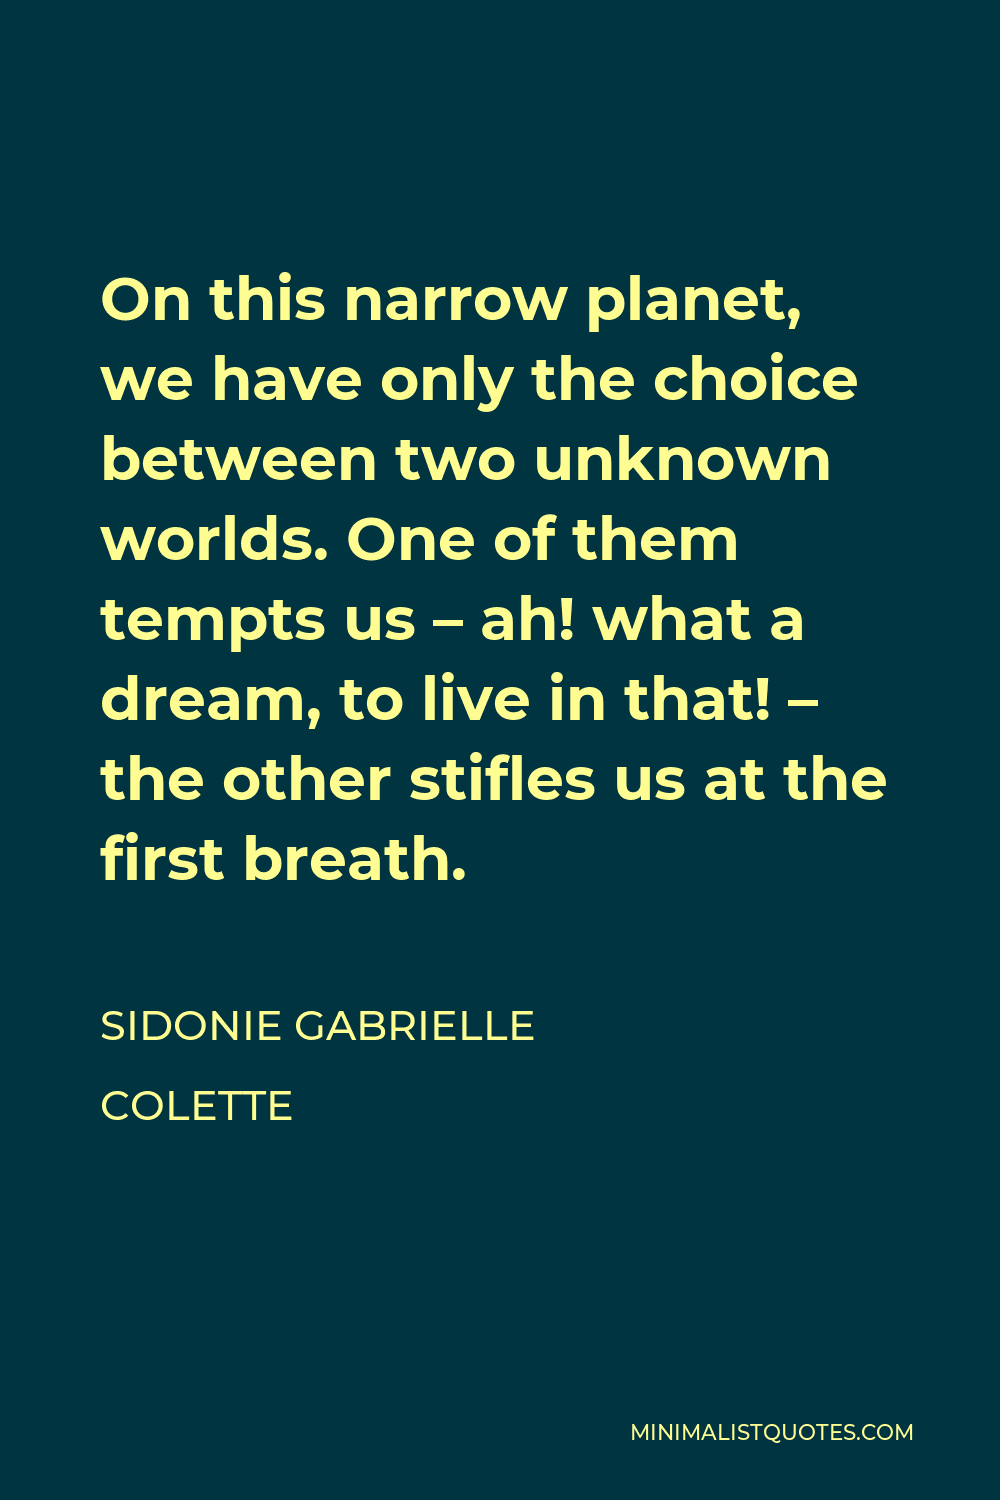 Sidonie Gabrielle Colette Quote - On this narrow planet, we have only the choice between two unknown worlds. One of them tempts us – ah! what a dream, to live in that! – the other stifles us at the first breath.